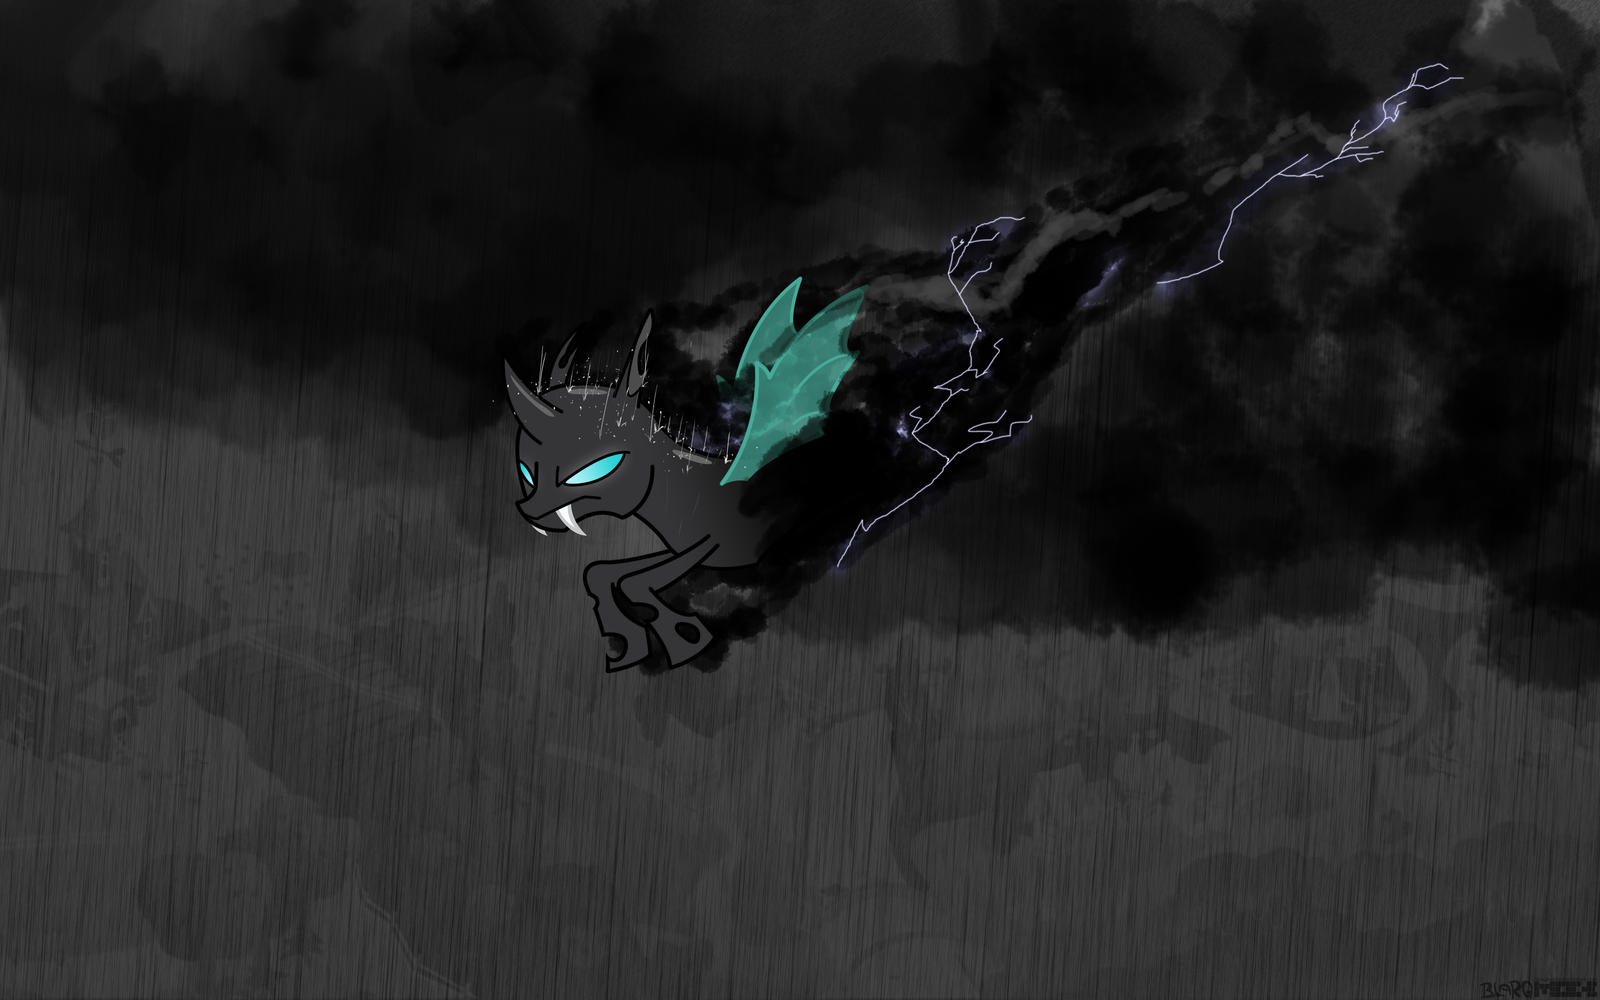 A changeling can dream too